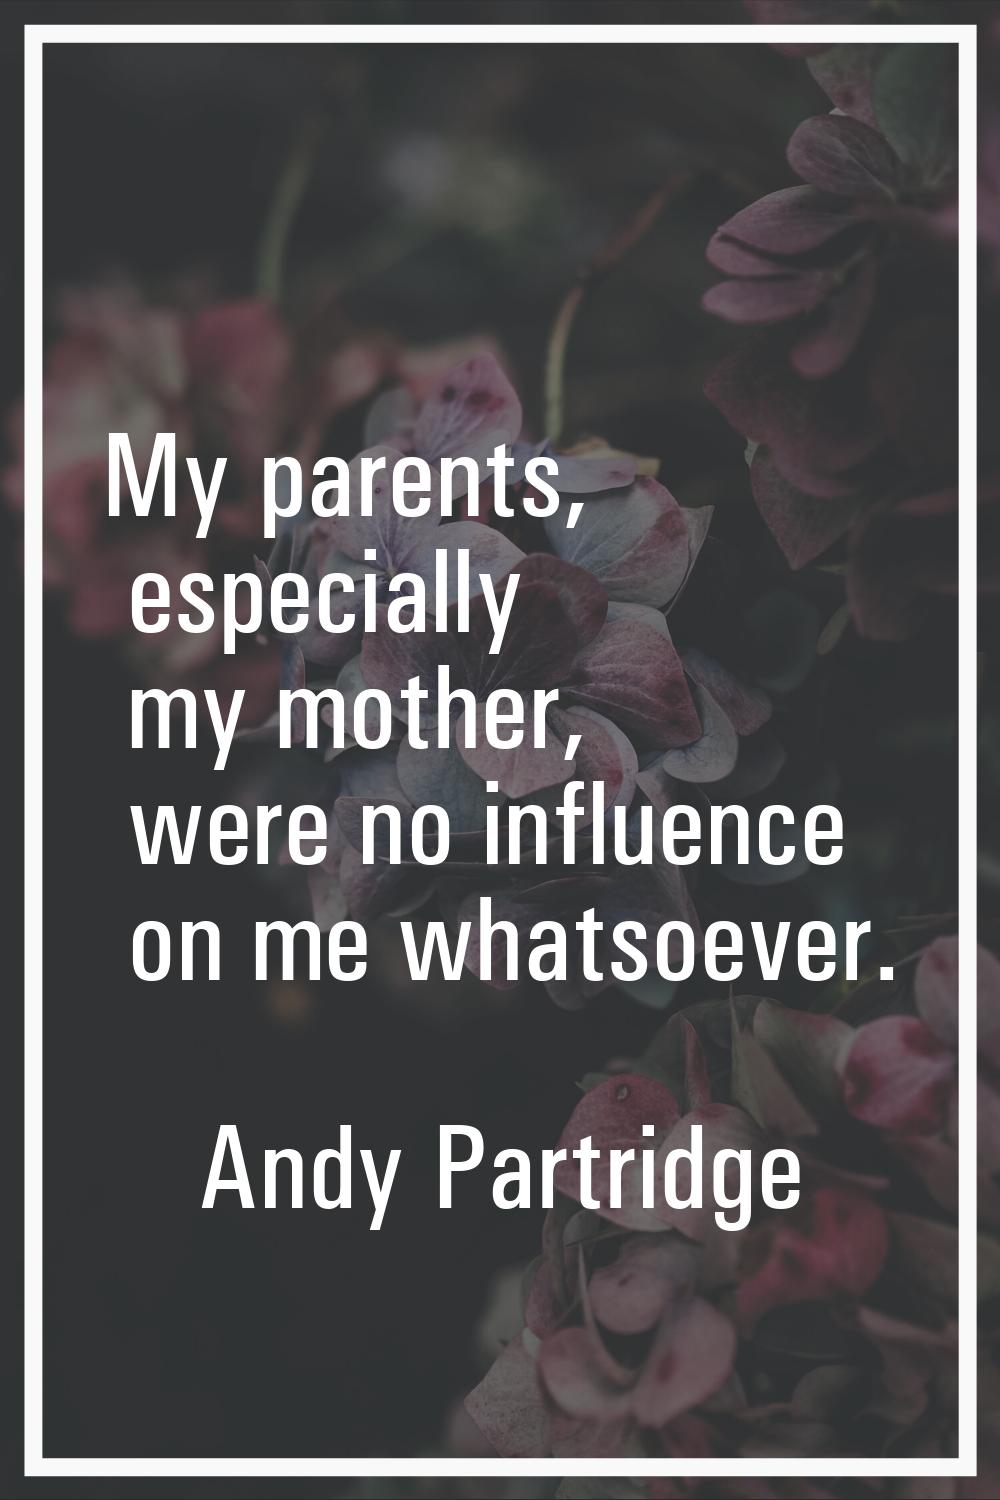 My parents, especially my mother, were no influence on me whatsoever.